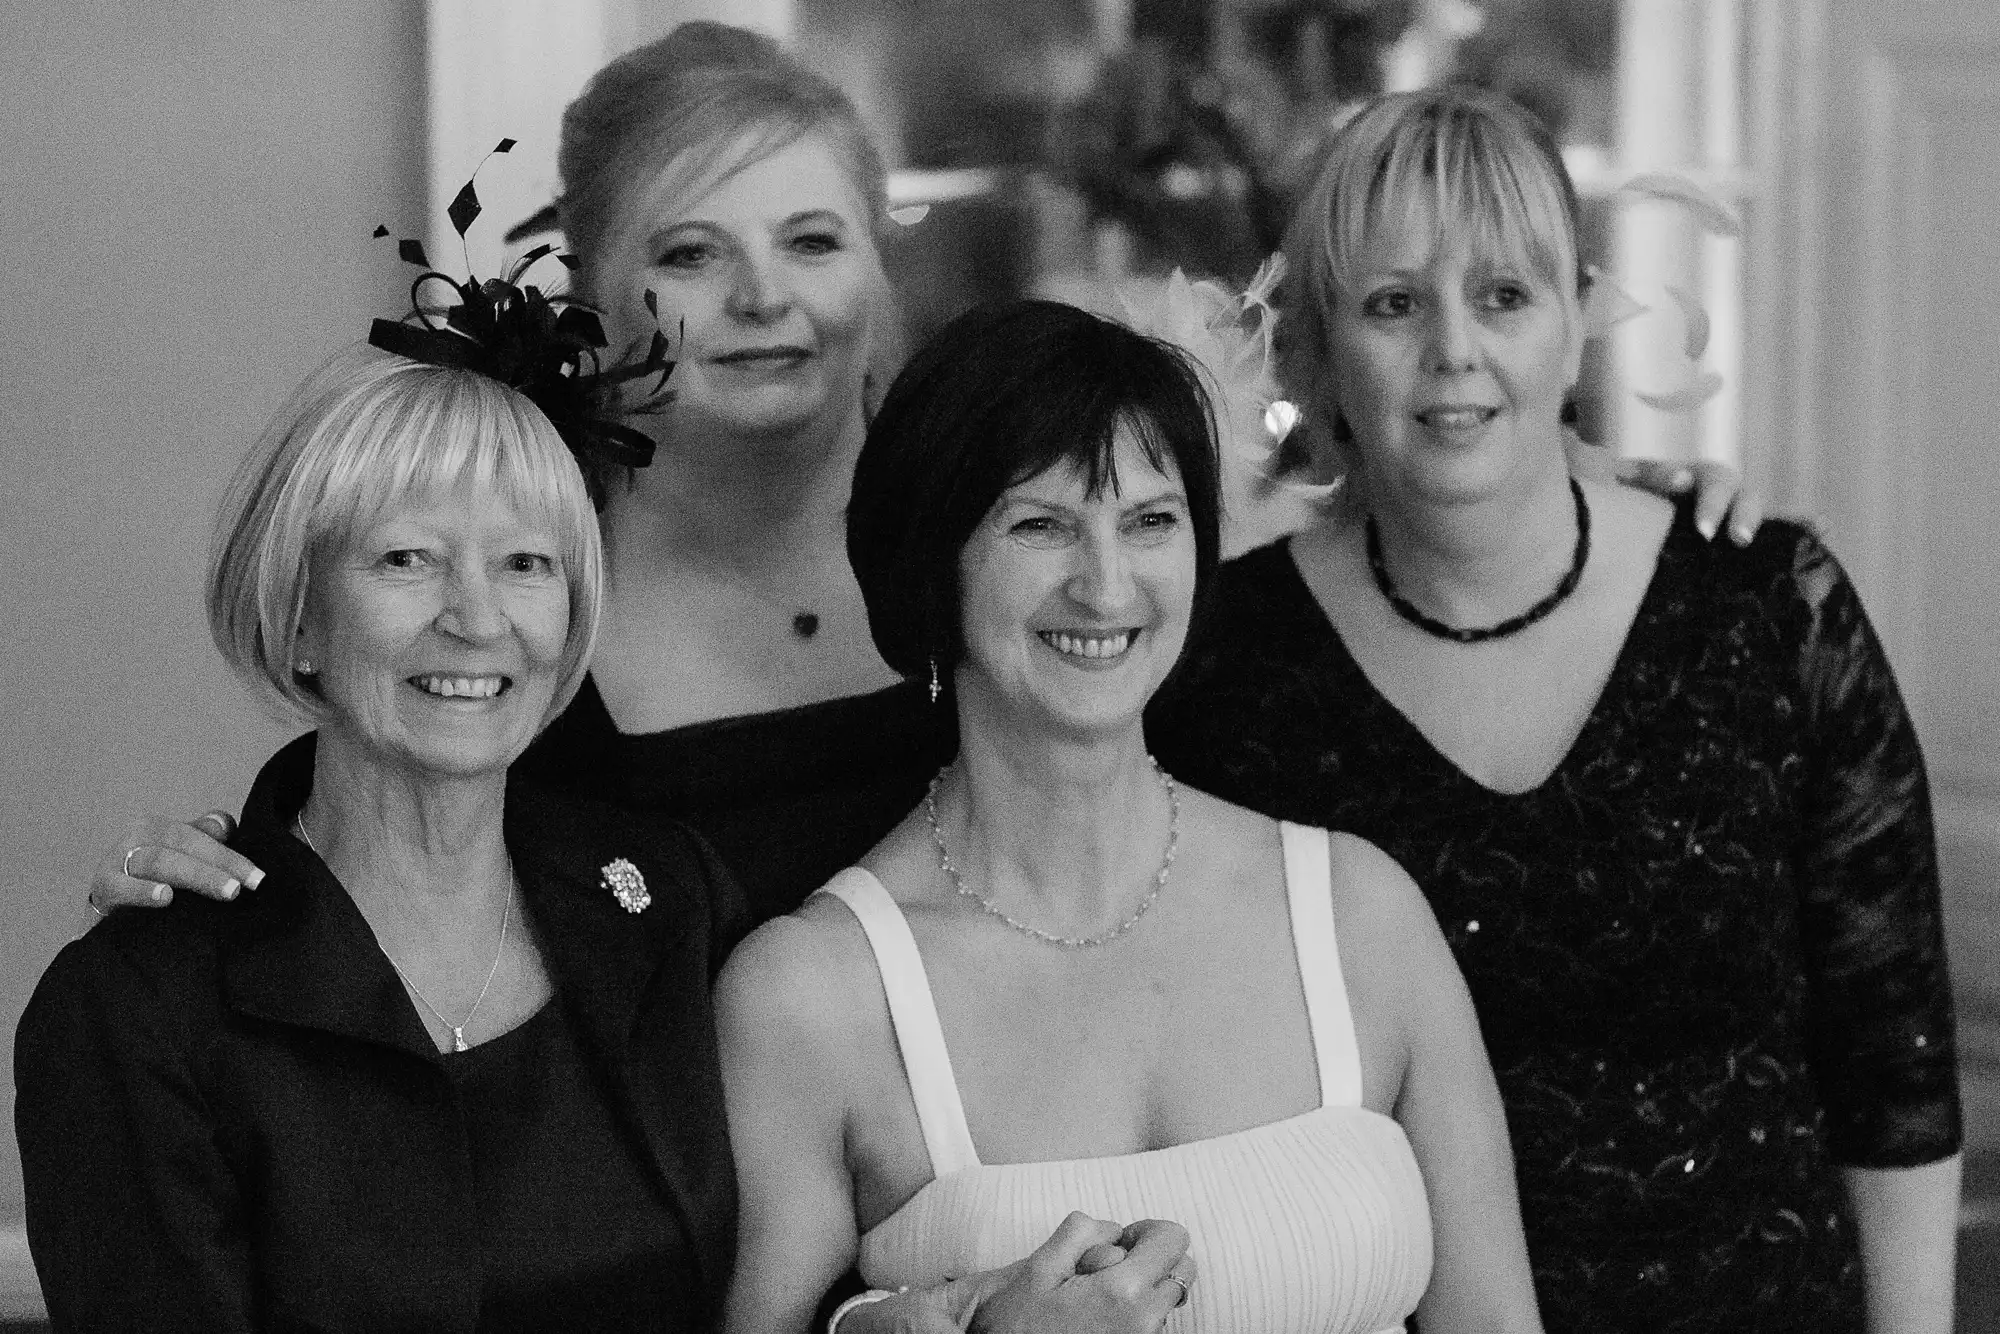 Four women smiling in a group, dressed in formal attire for a black and white photo.